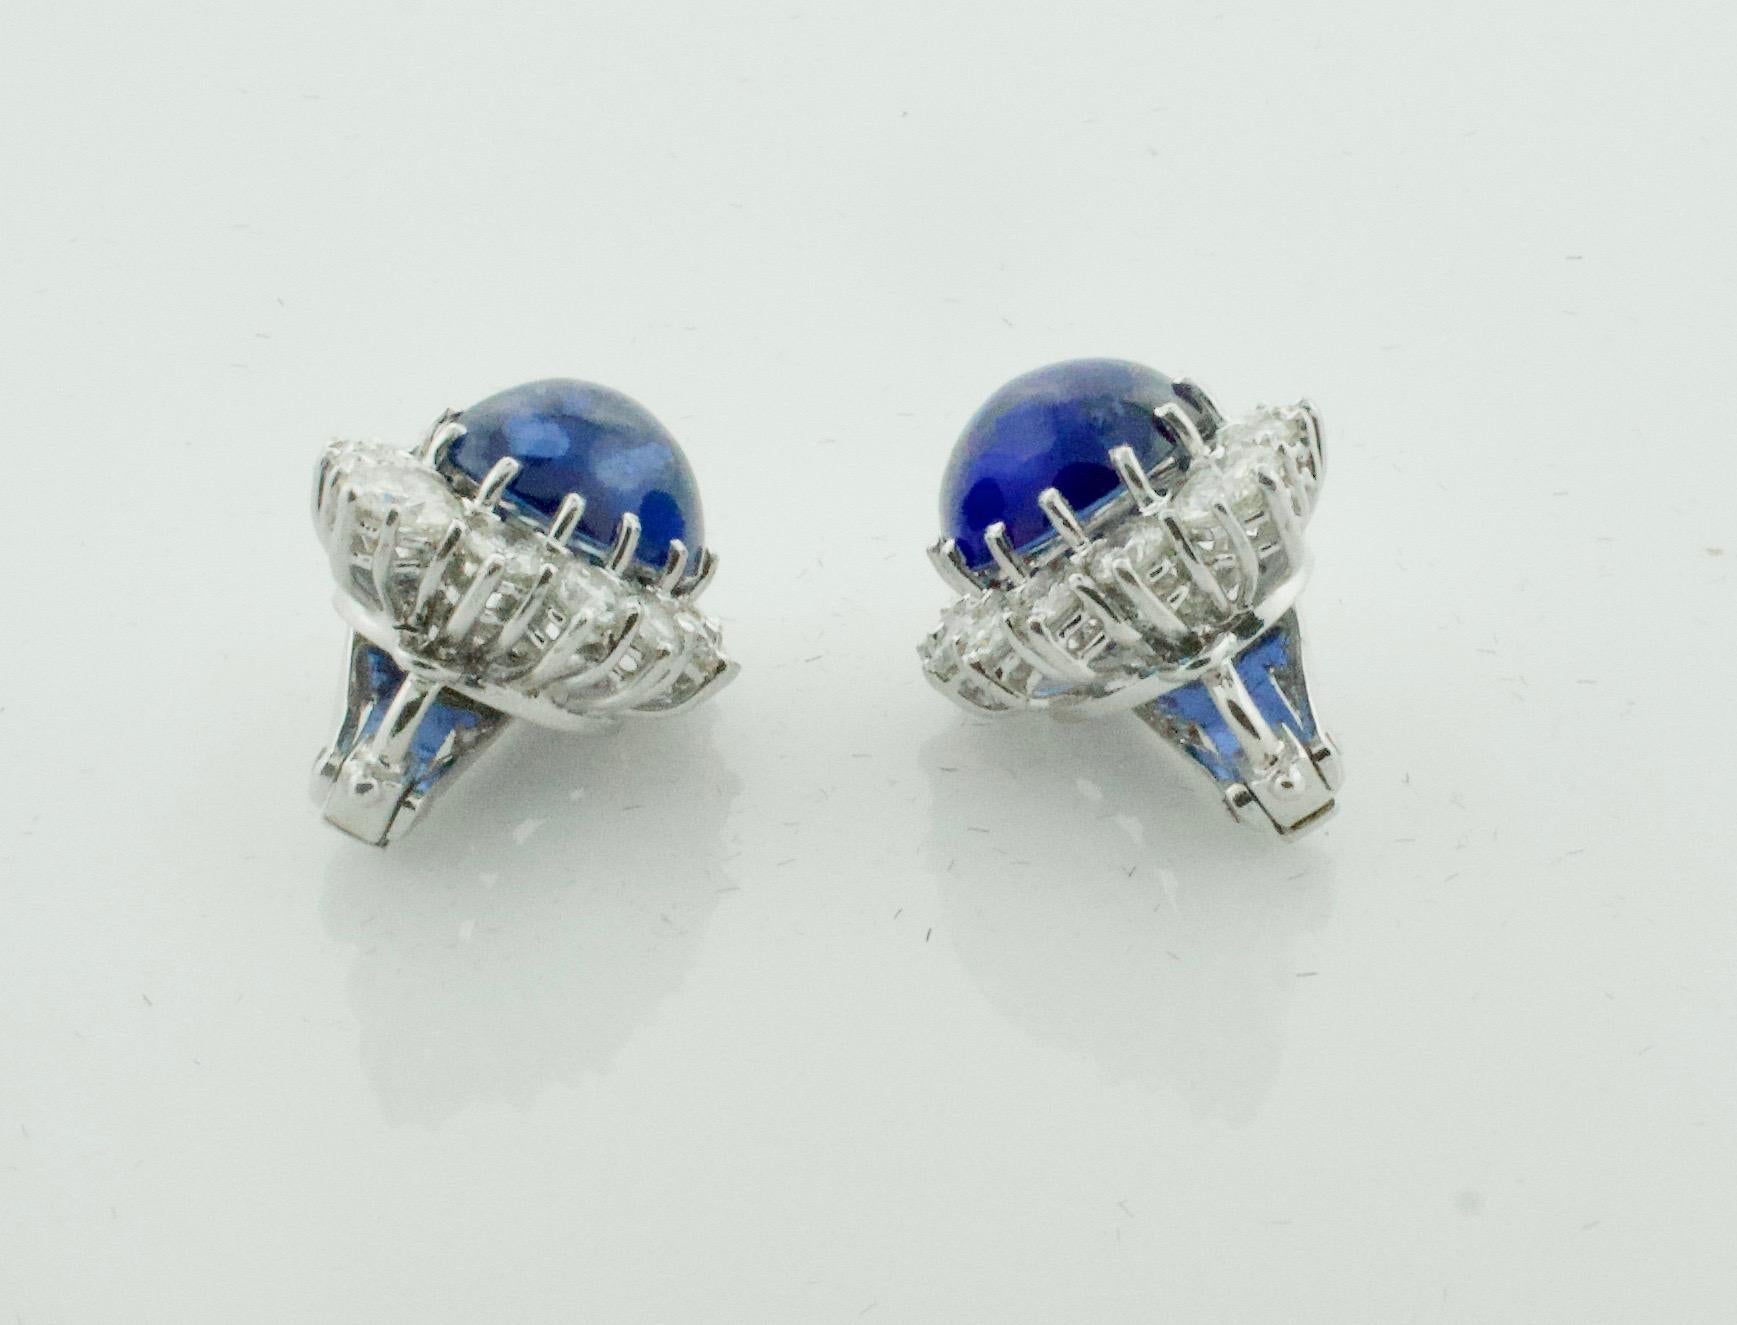 Oval Cut Beautiful Cabochon Sapphire and Diamond Clip Earrings in Platinum